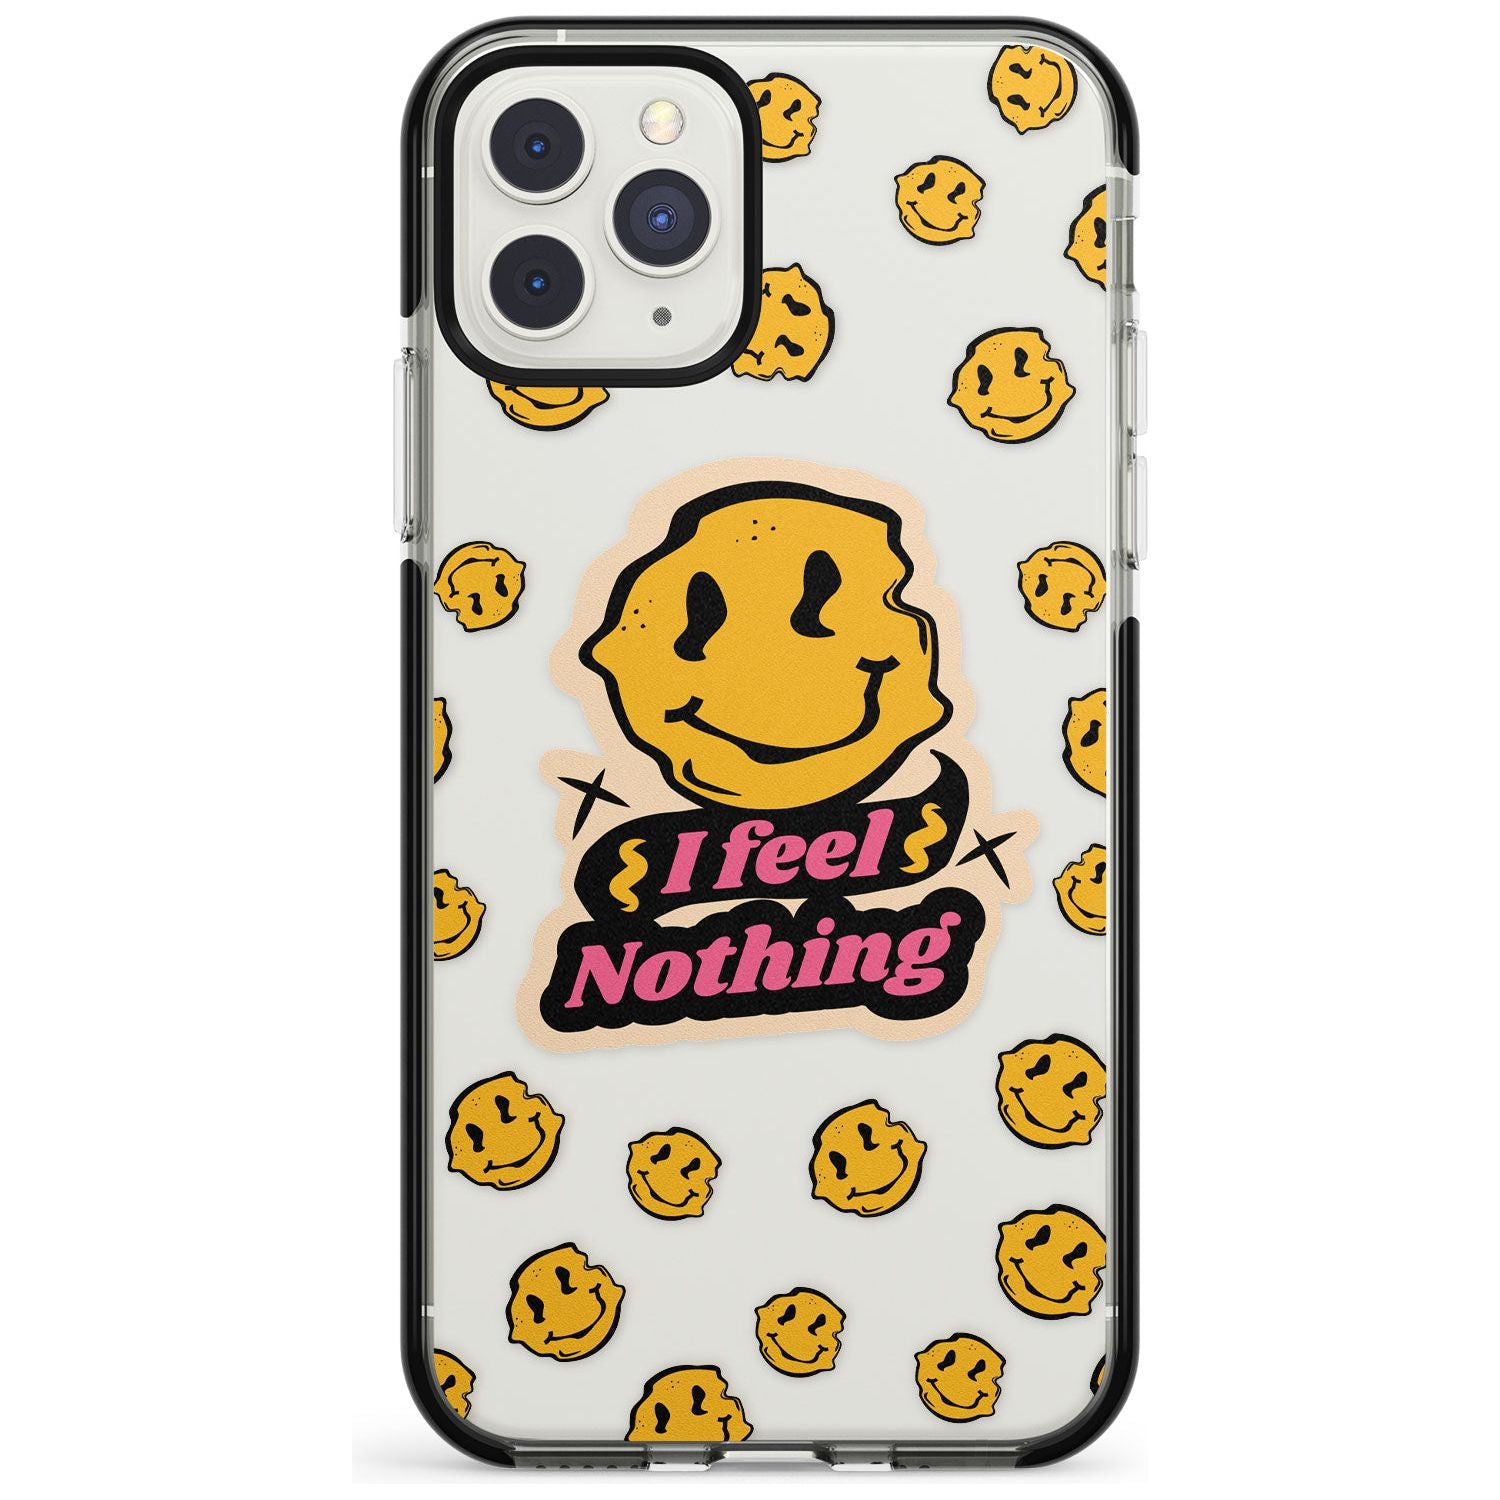 I feel nothing (Clear) Black Impact Phone Case for iPhone 11 Pro Max